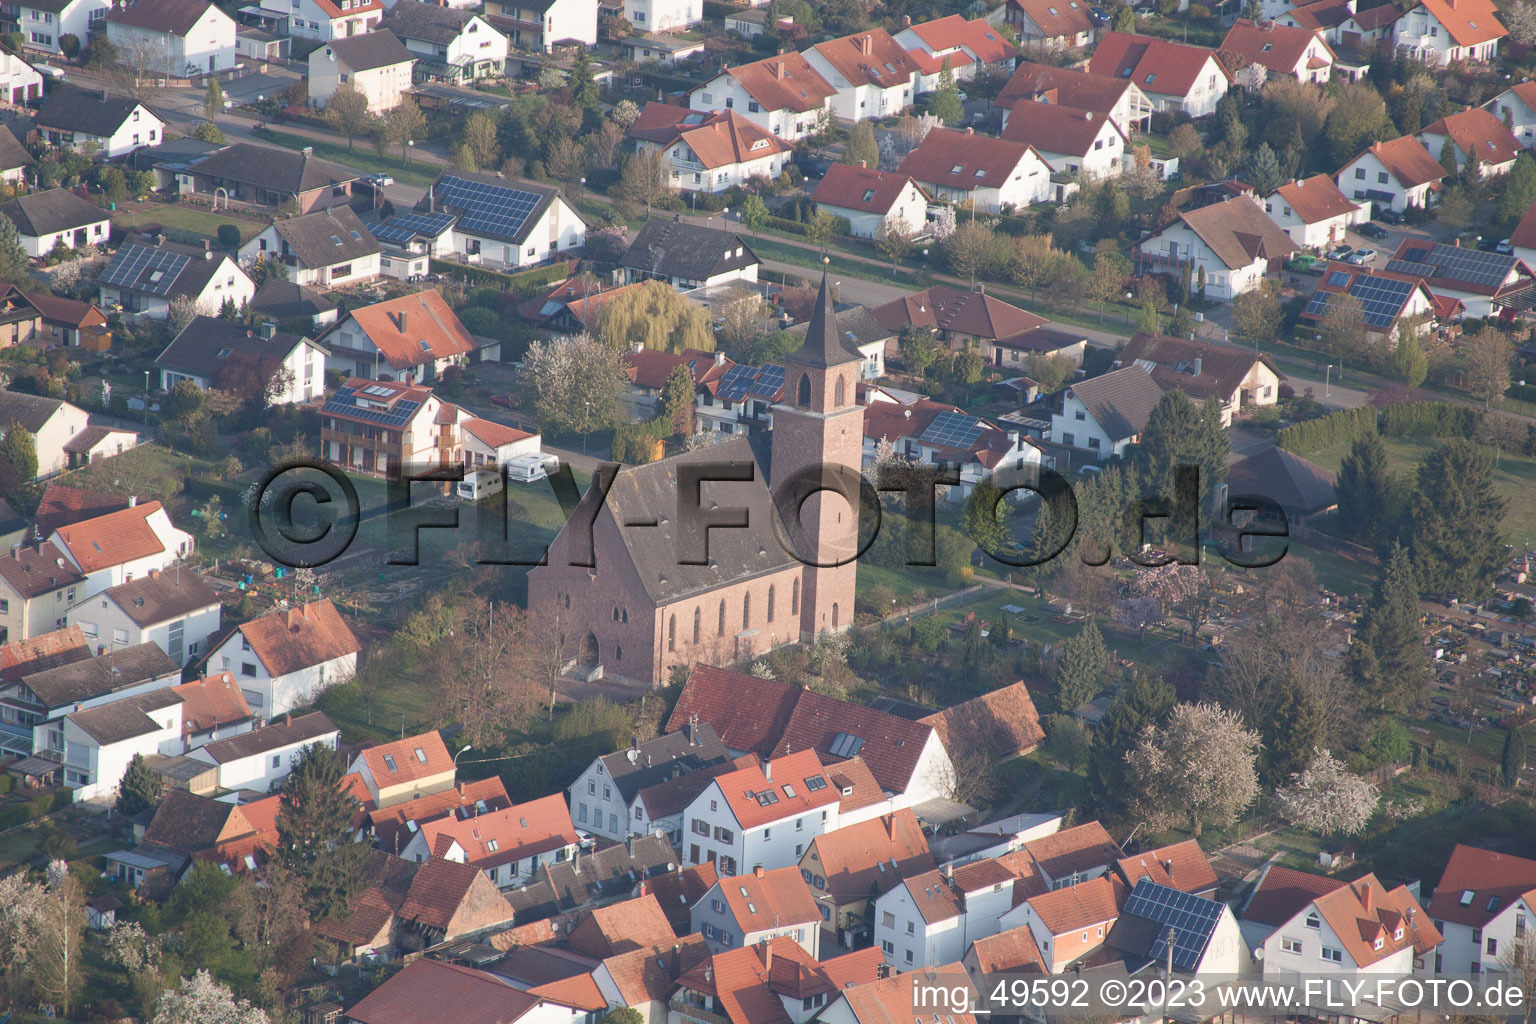 Essingen in the state Rhineland-Palatinate, Germany from above